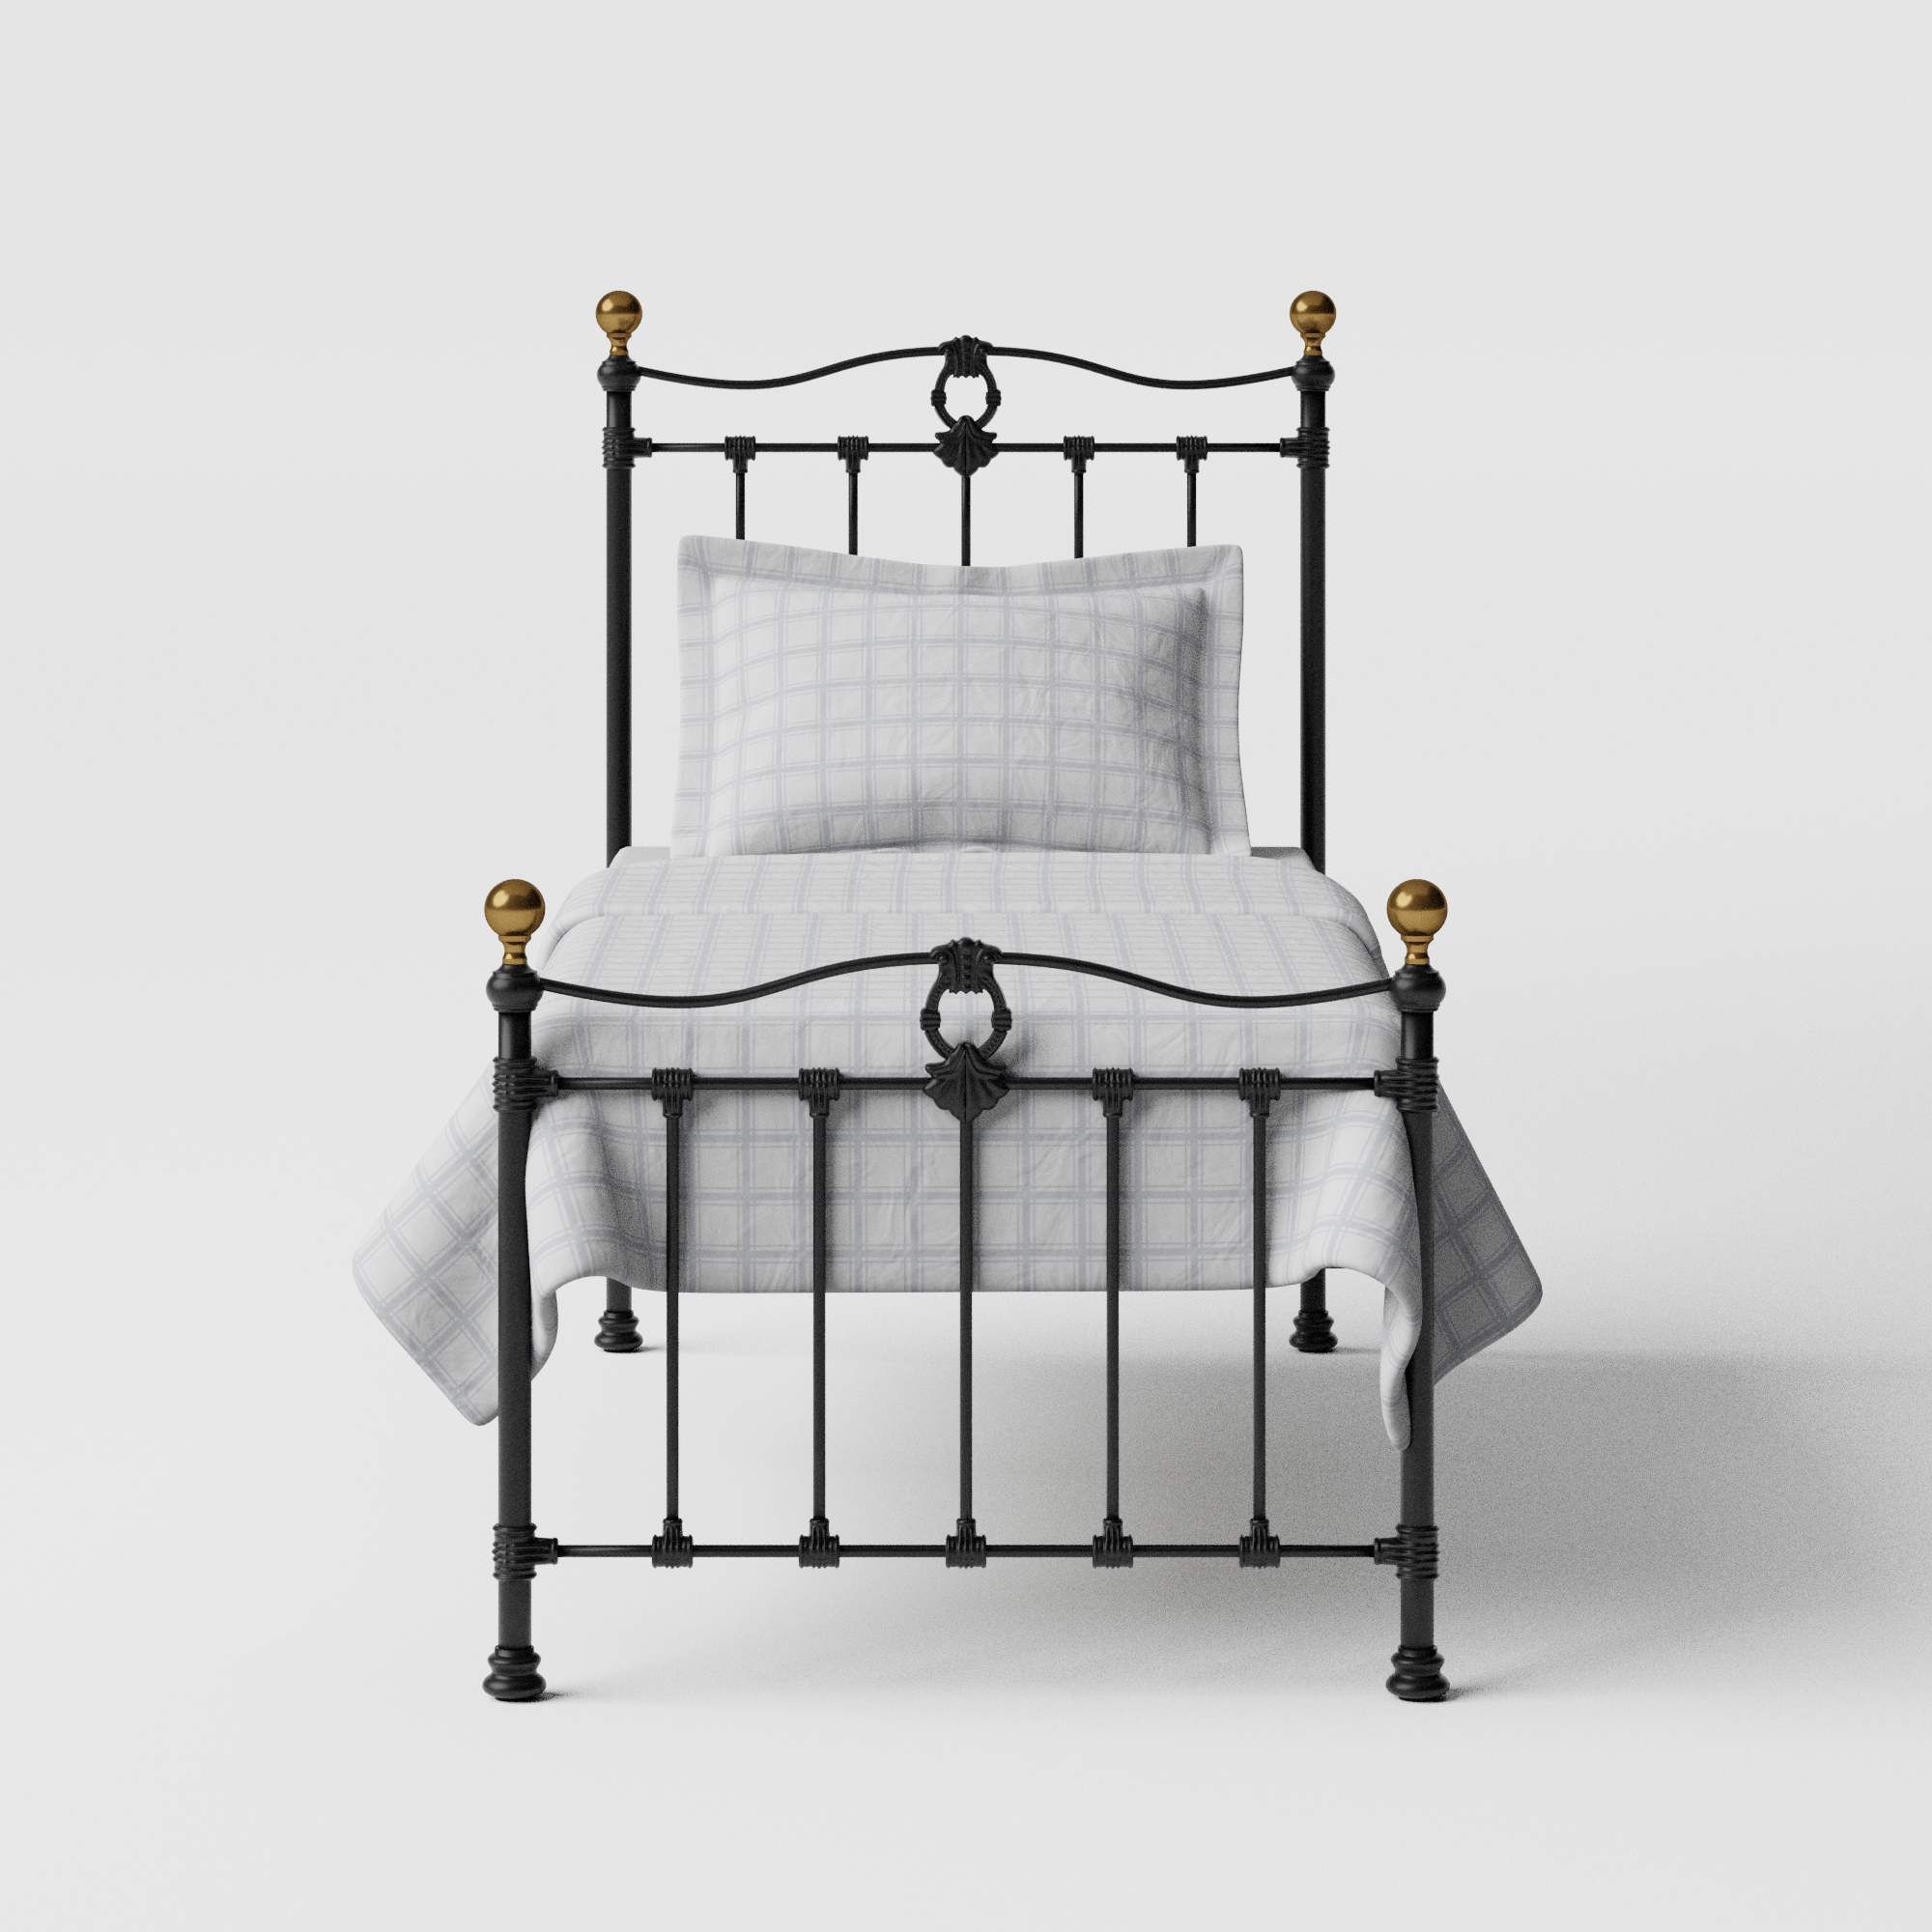 Tulsk Low Footend - Iron/Metal Bed Frame - The Original Bed Co - UK